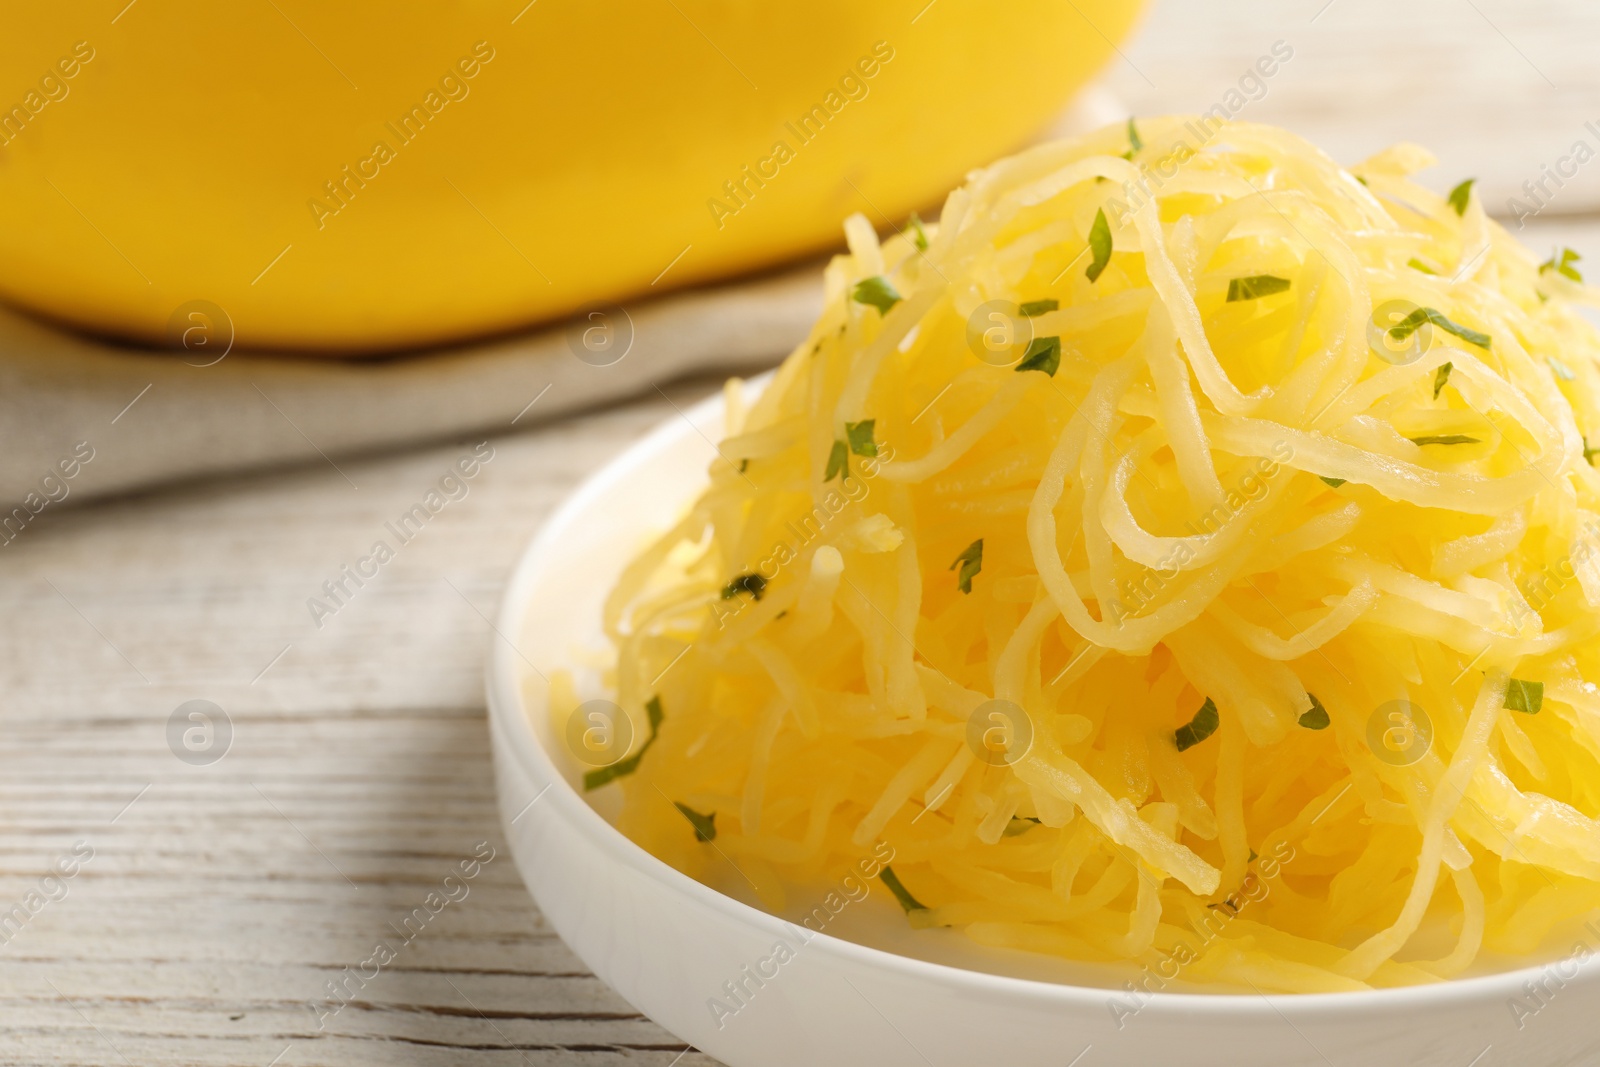 Photo of Plate with cooked spaghetti squash on wooden table